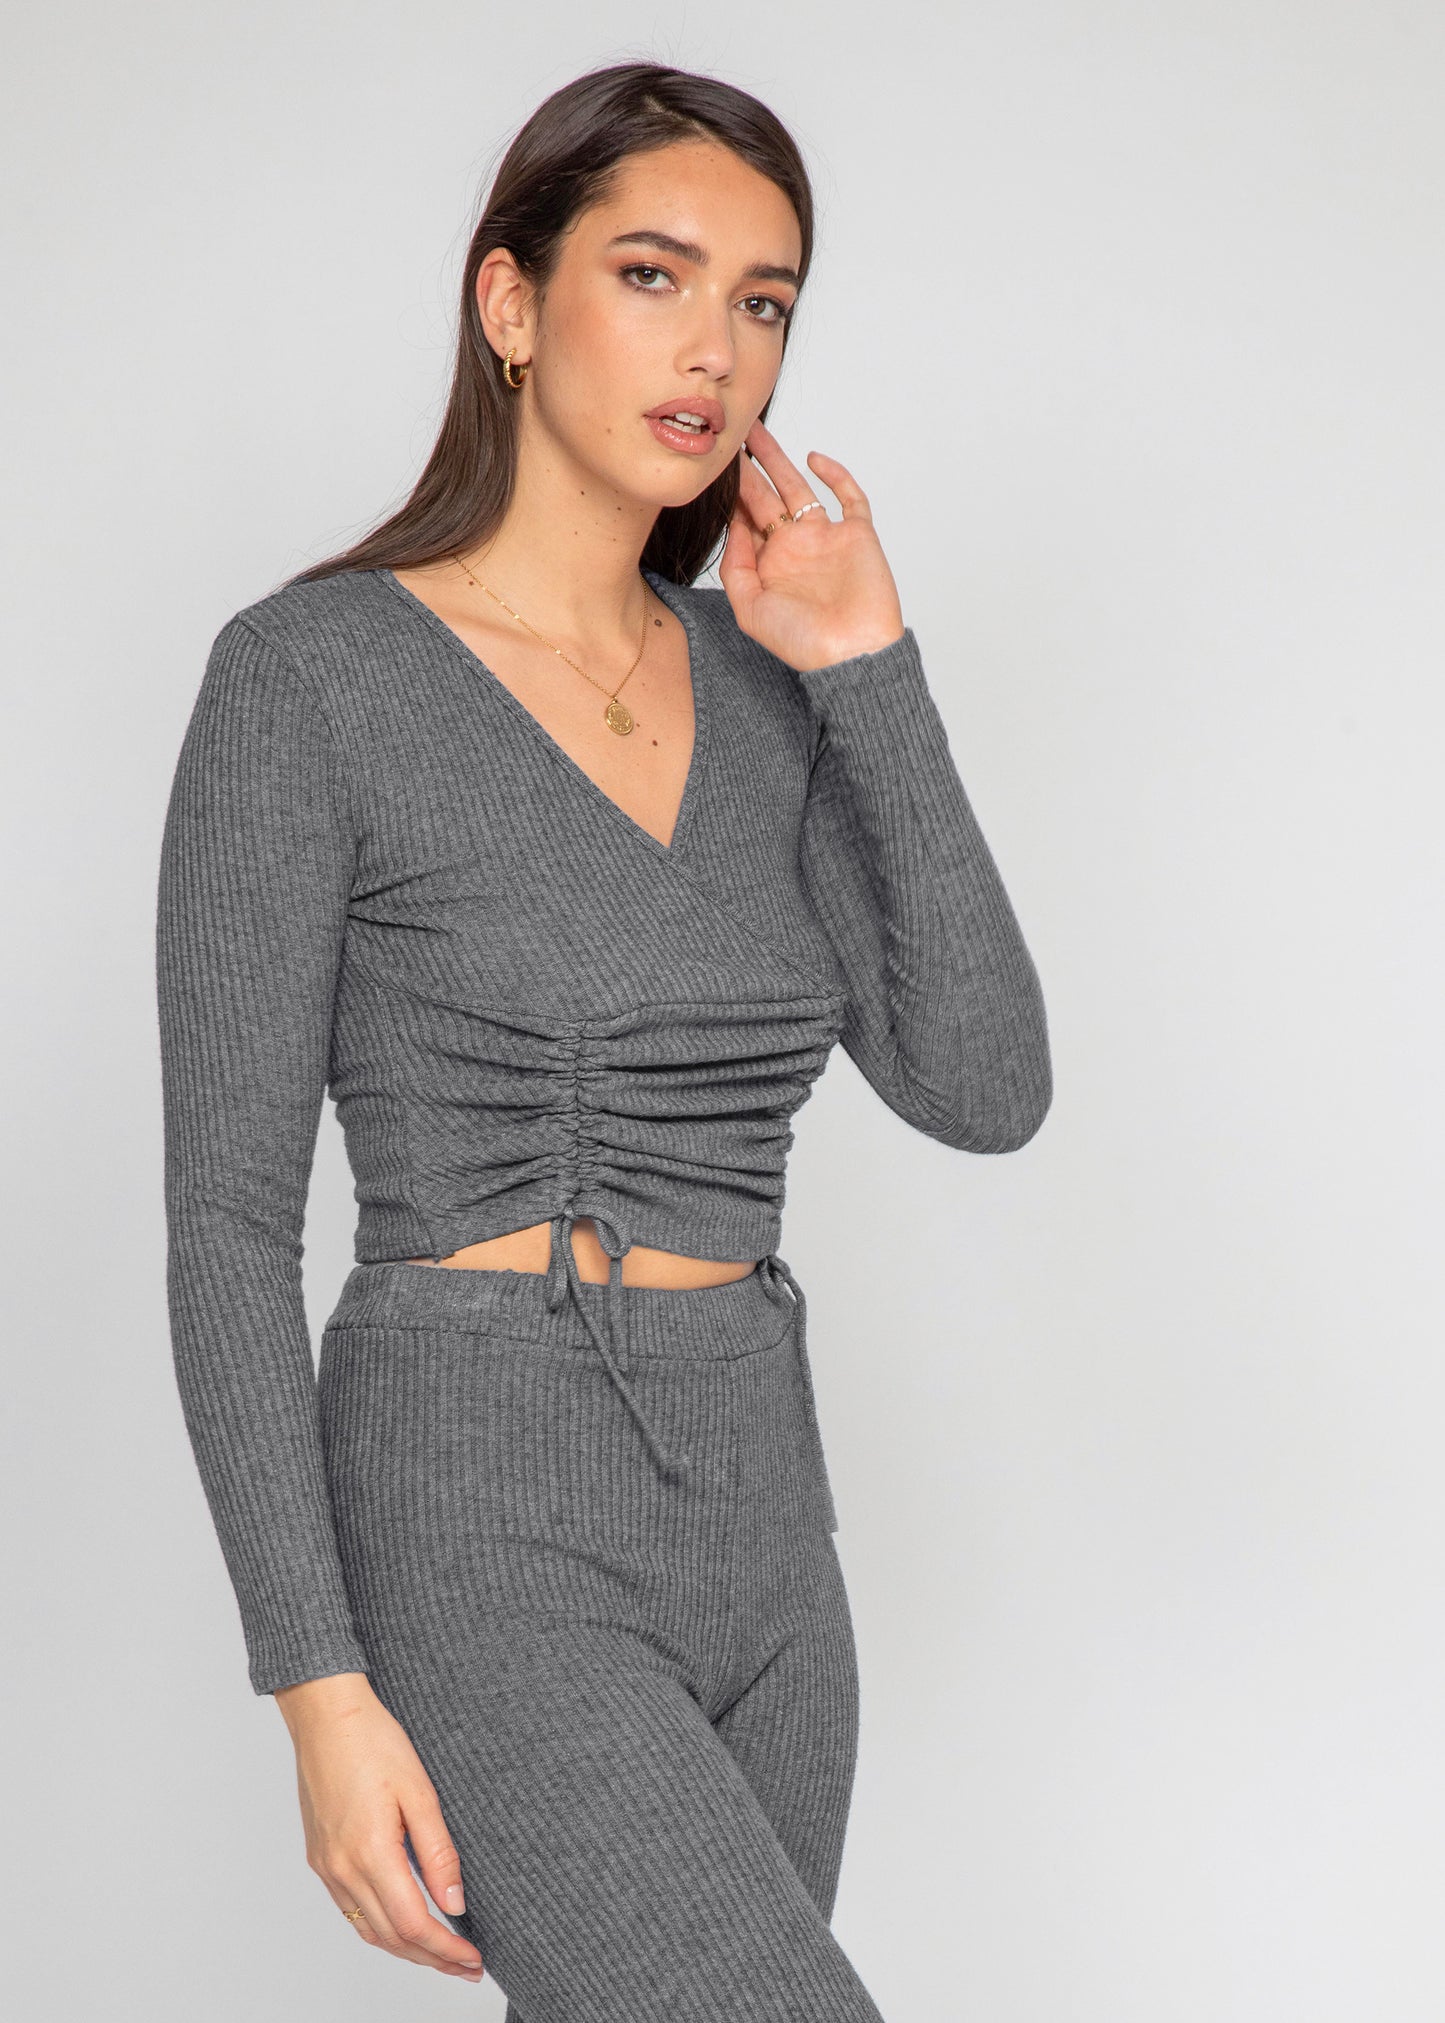 Wrap top with ruched front in grey